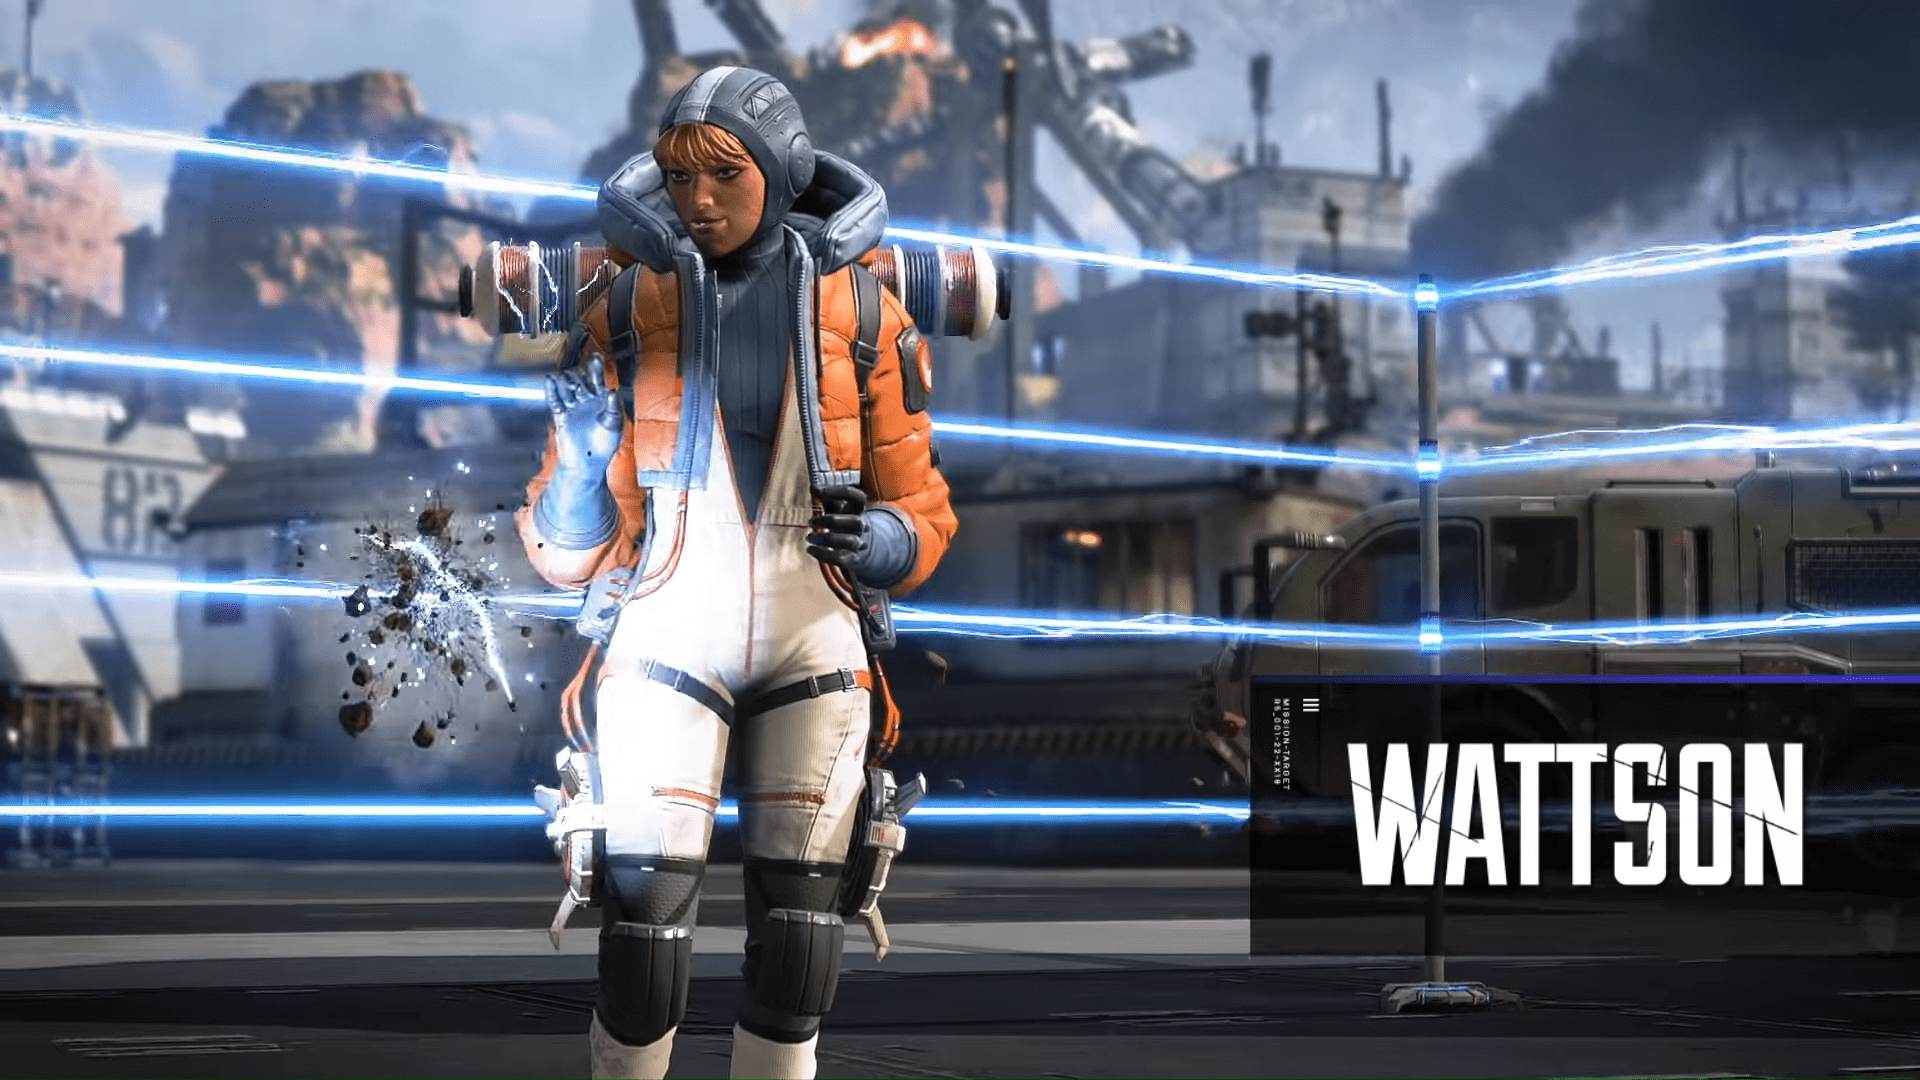 Wattson Is The Star Of Apex Legends Season 2 Ranked Mode